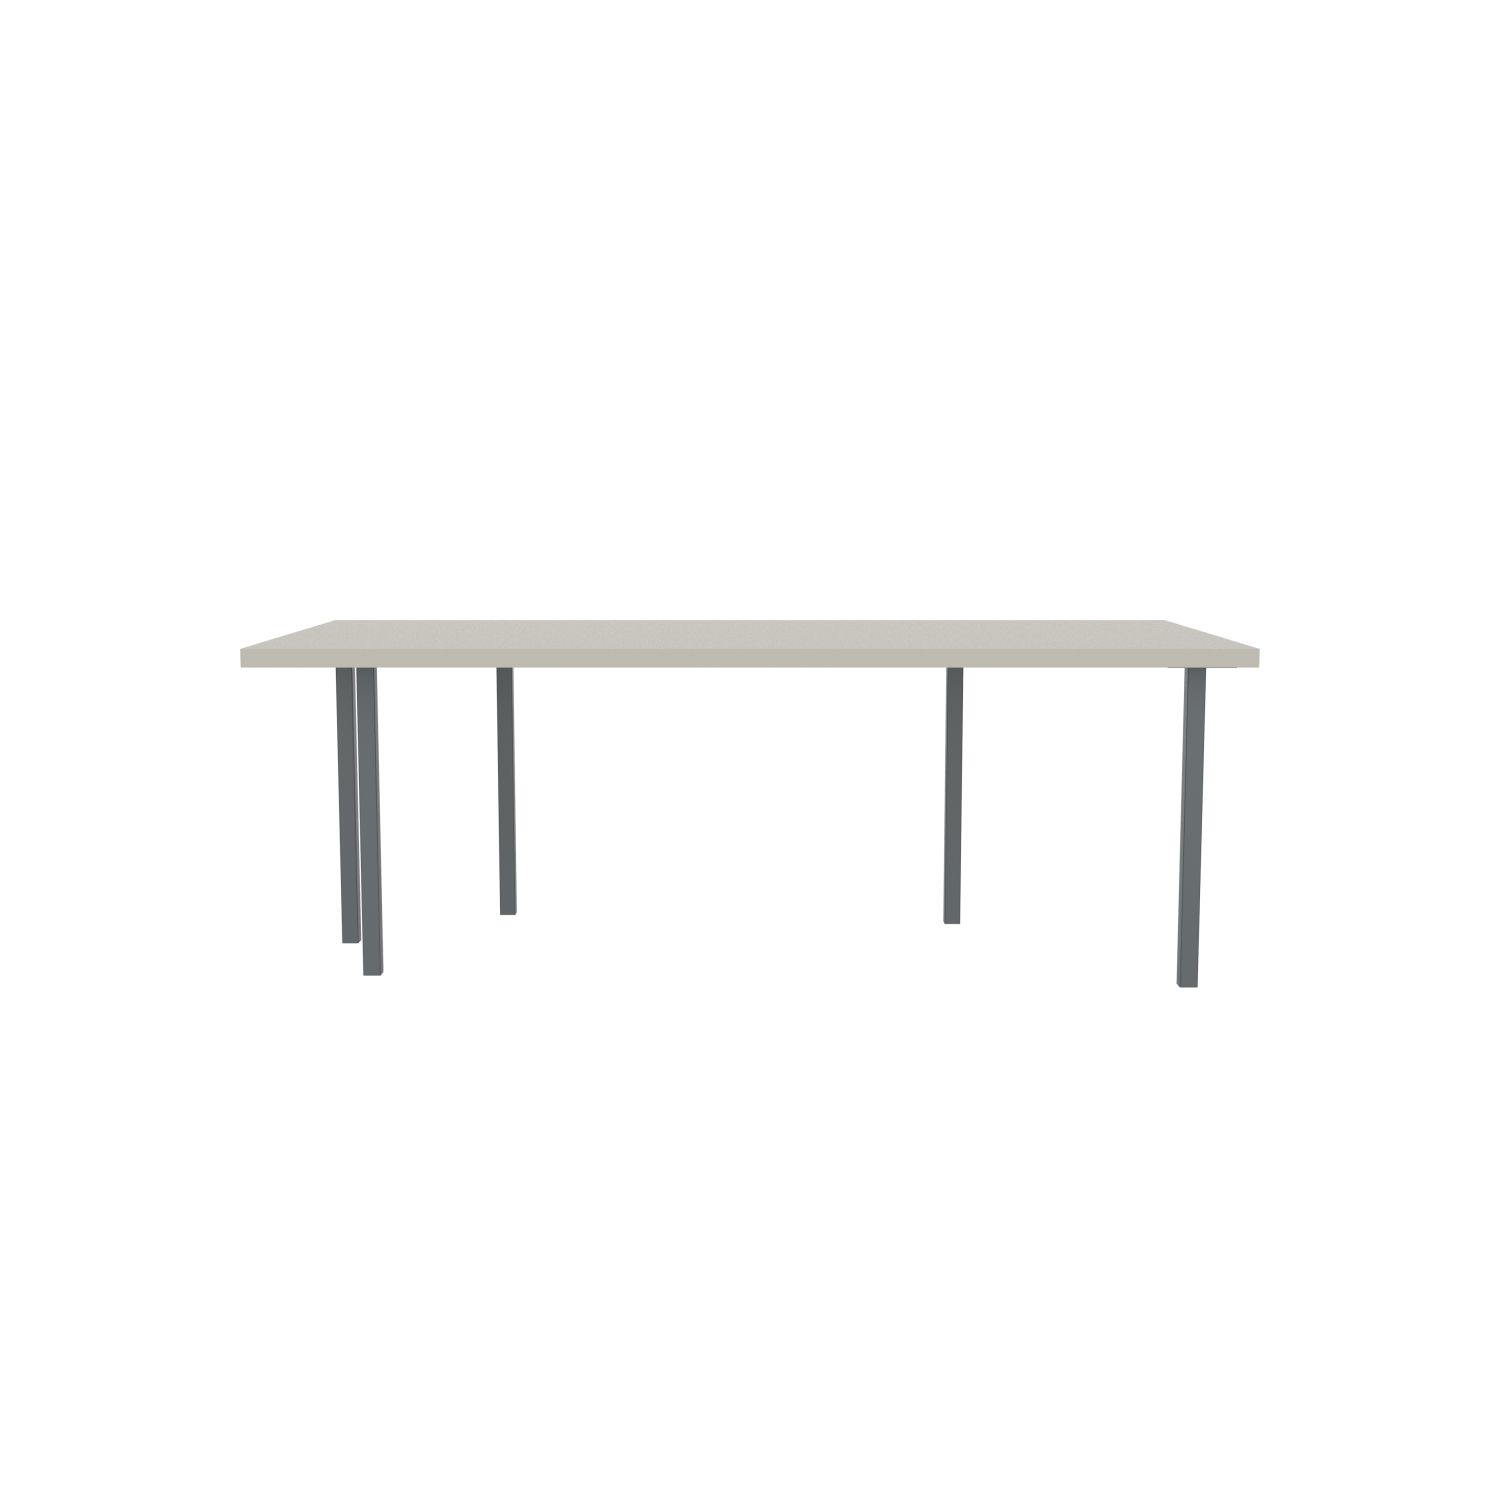 lensvelt bbrand table five fixed heigt 103x218 hpl white 50 mm price level 1 dark grey ral7011